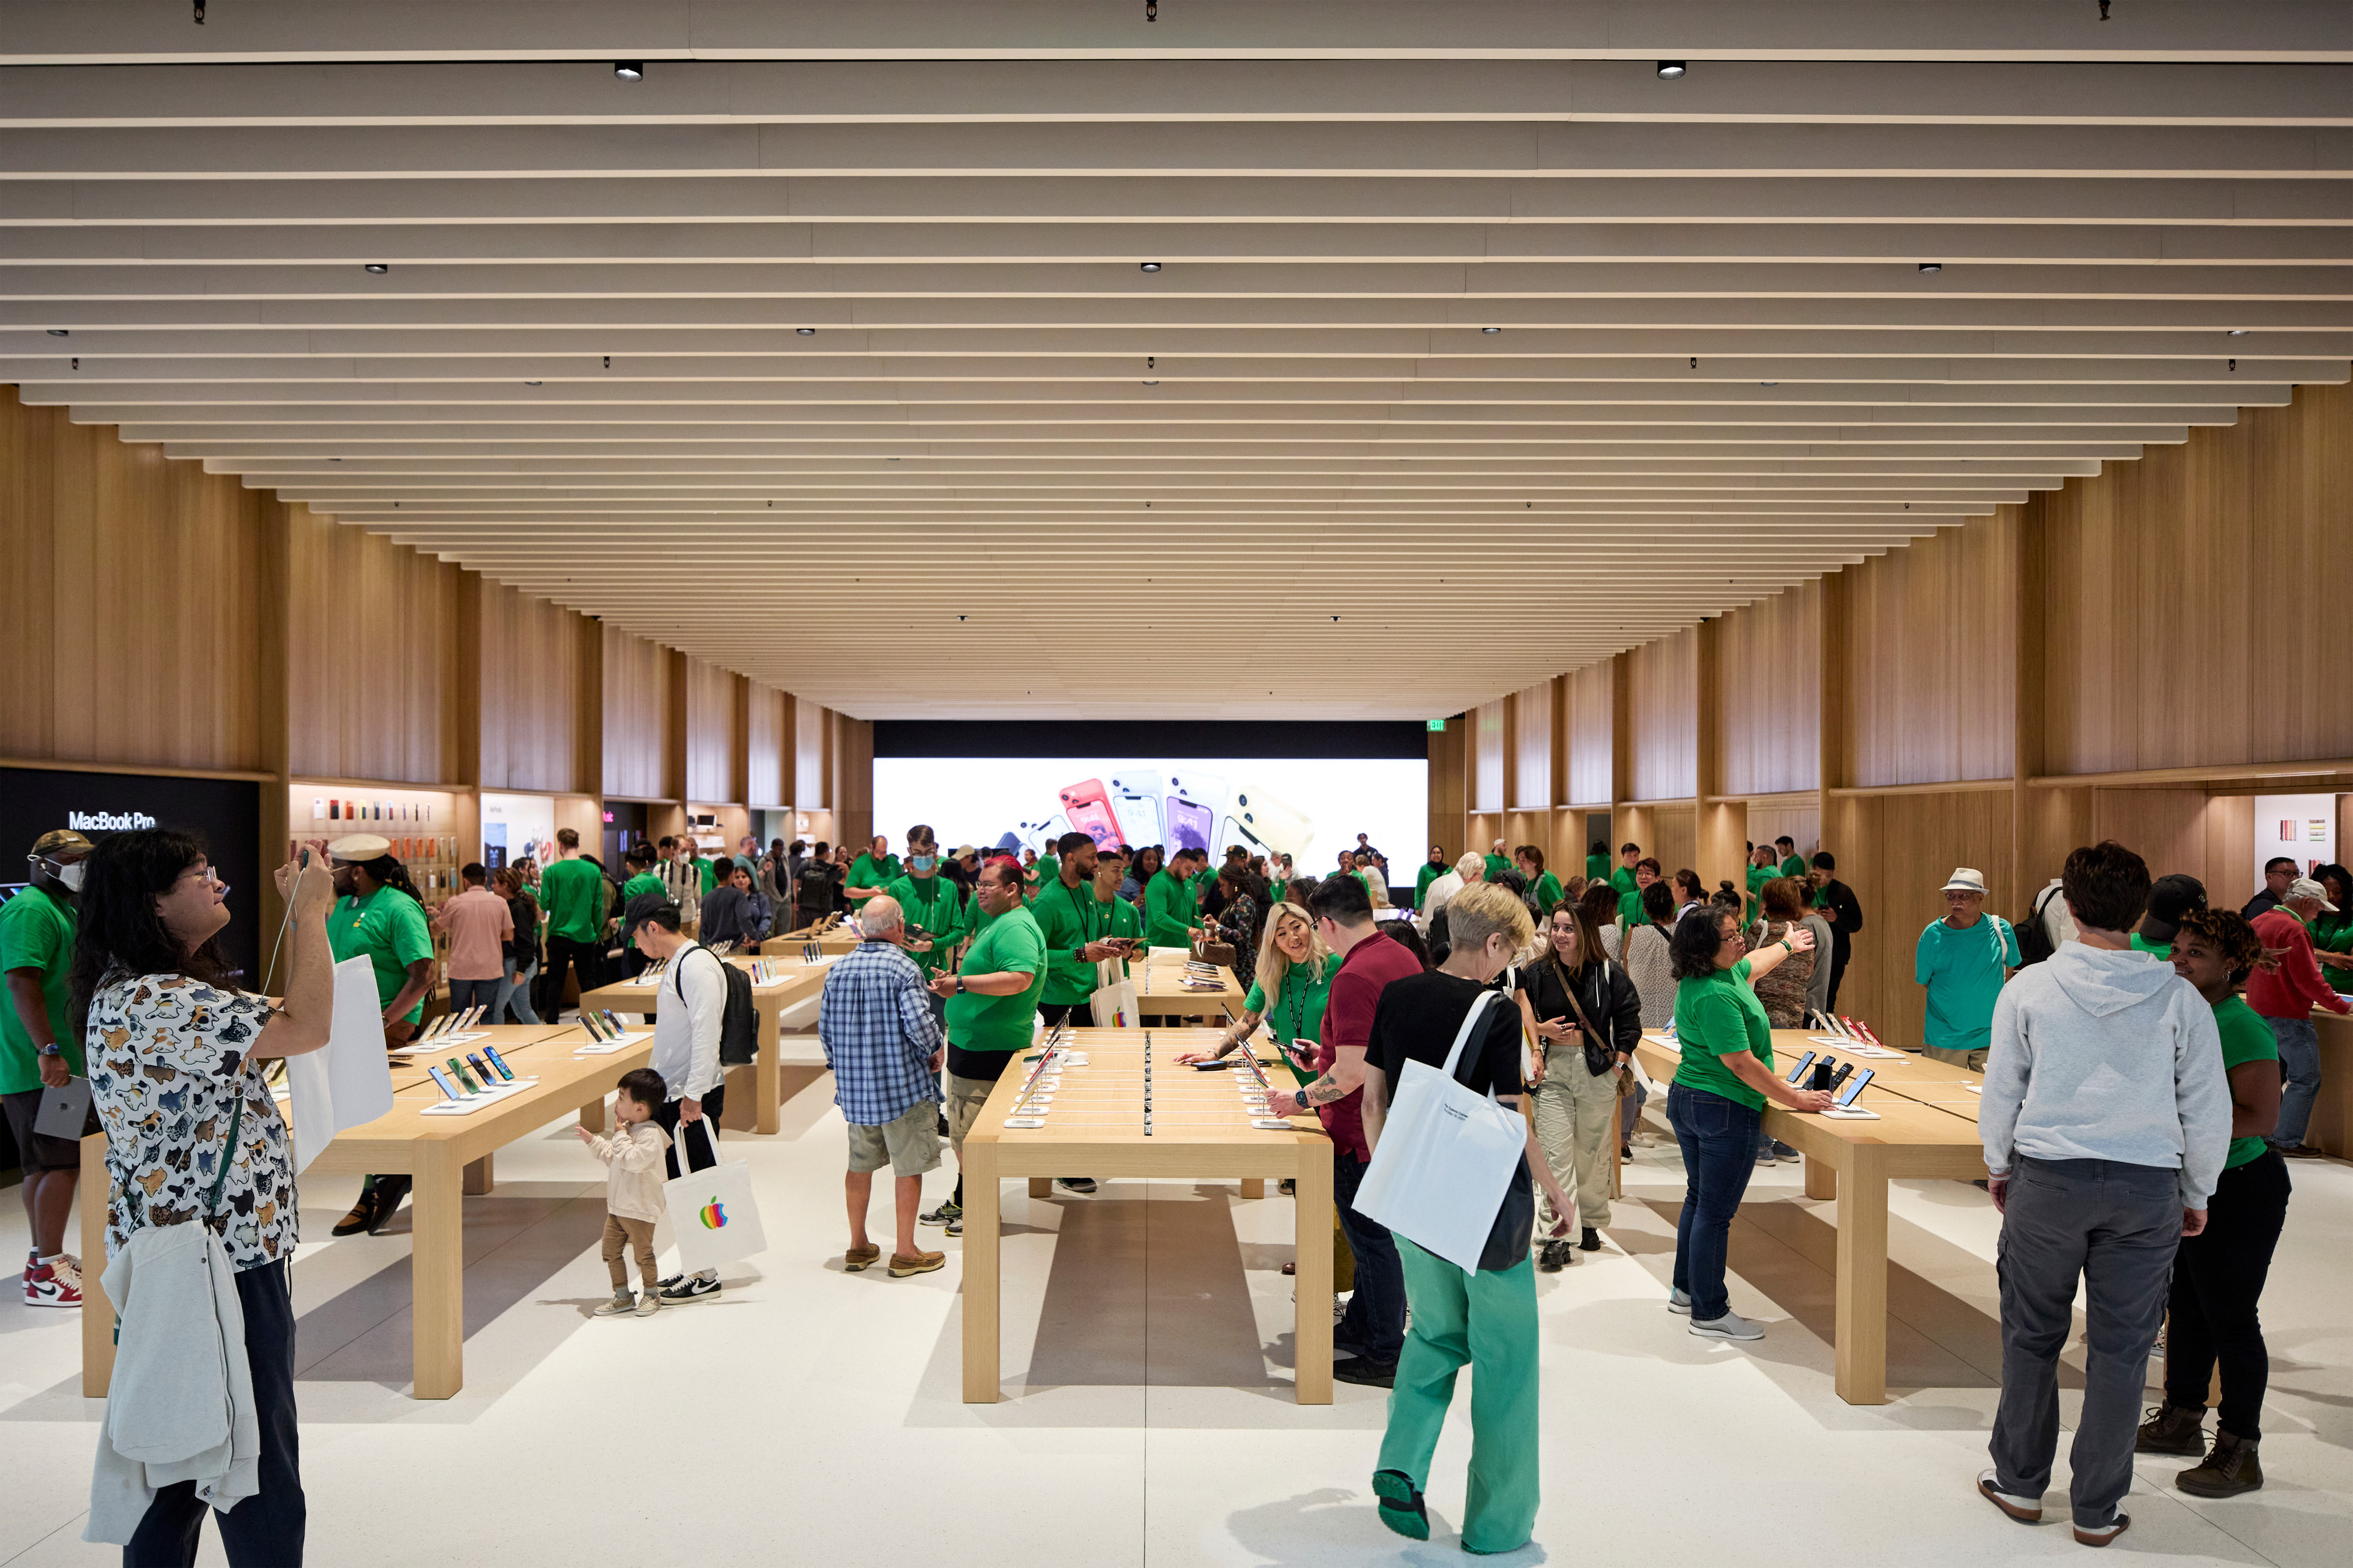 Apple may be planning to relocate its first retail store at Tysons